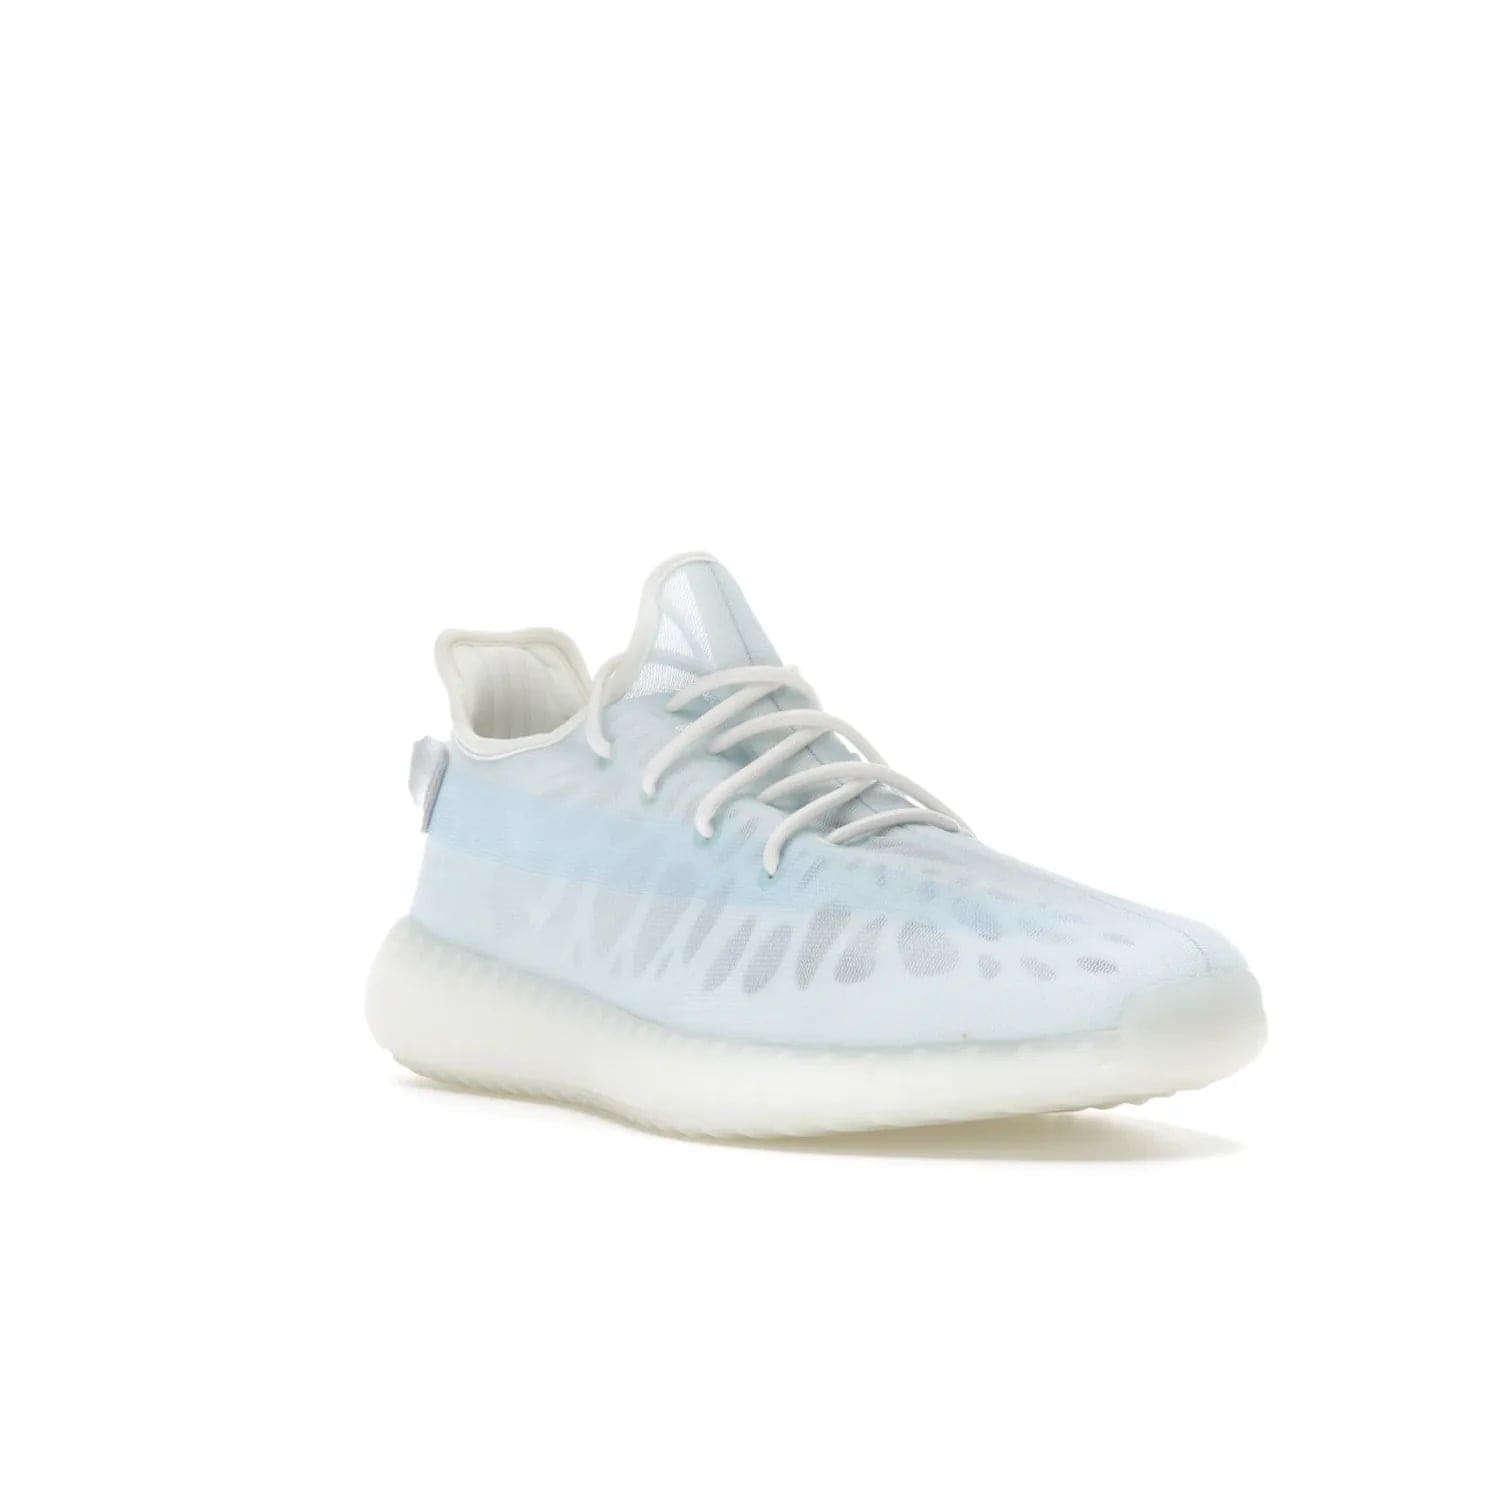 adidas Yeezy Boost 350 V2 Mono Ice - Image 6 - Only at www.BallersClubKickz.com - Introducing the adidas Yeezy 350 V2 Mono Ice - a sleek monofilament mesh design in Ice blue with Boost sole and heel pull tab. Released exclusively in the US for $220.